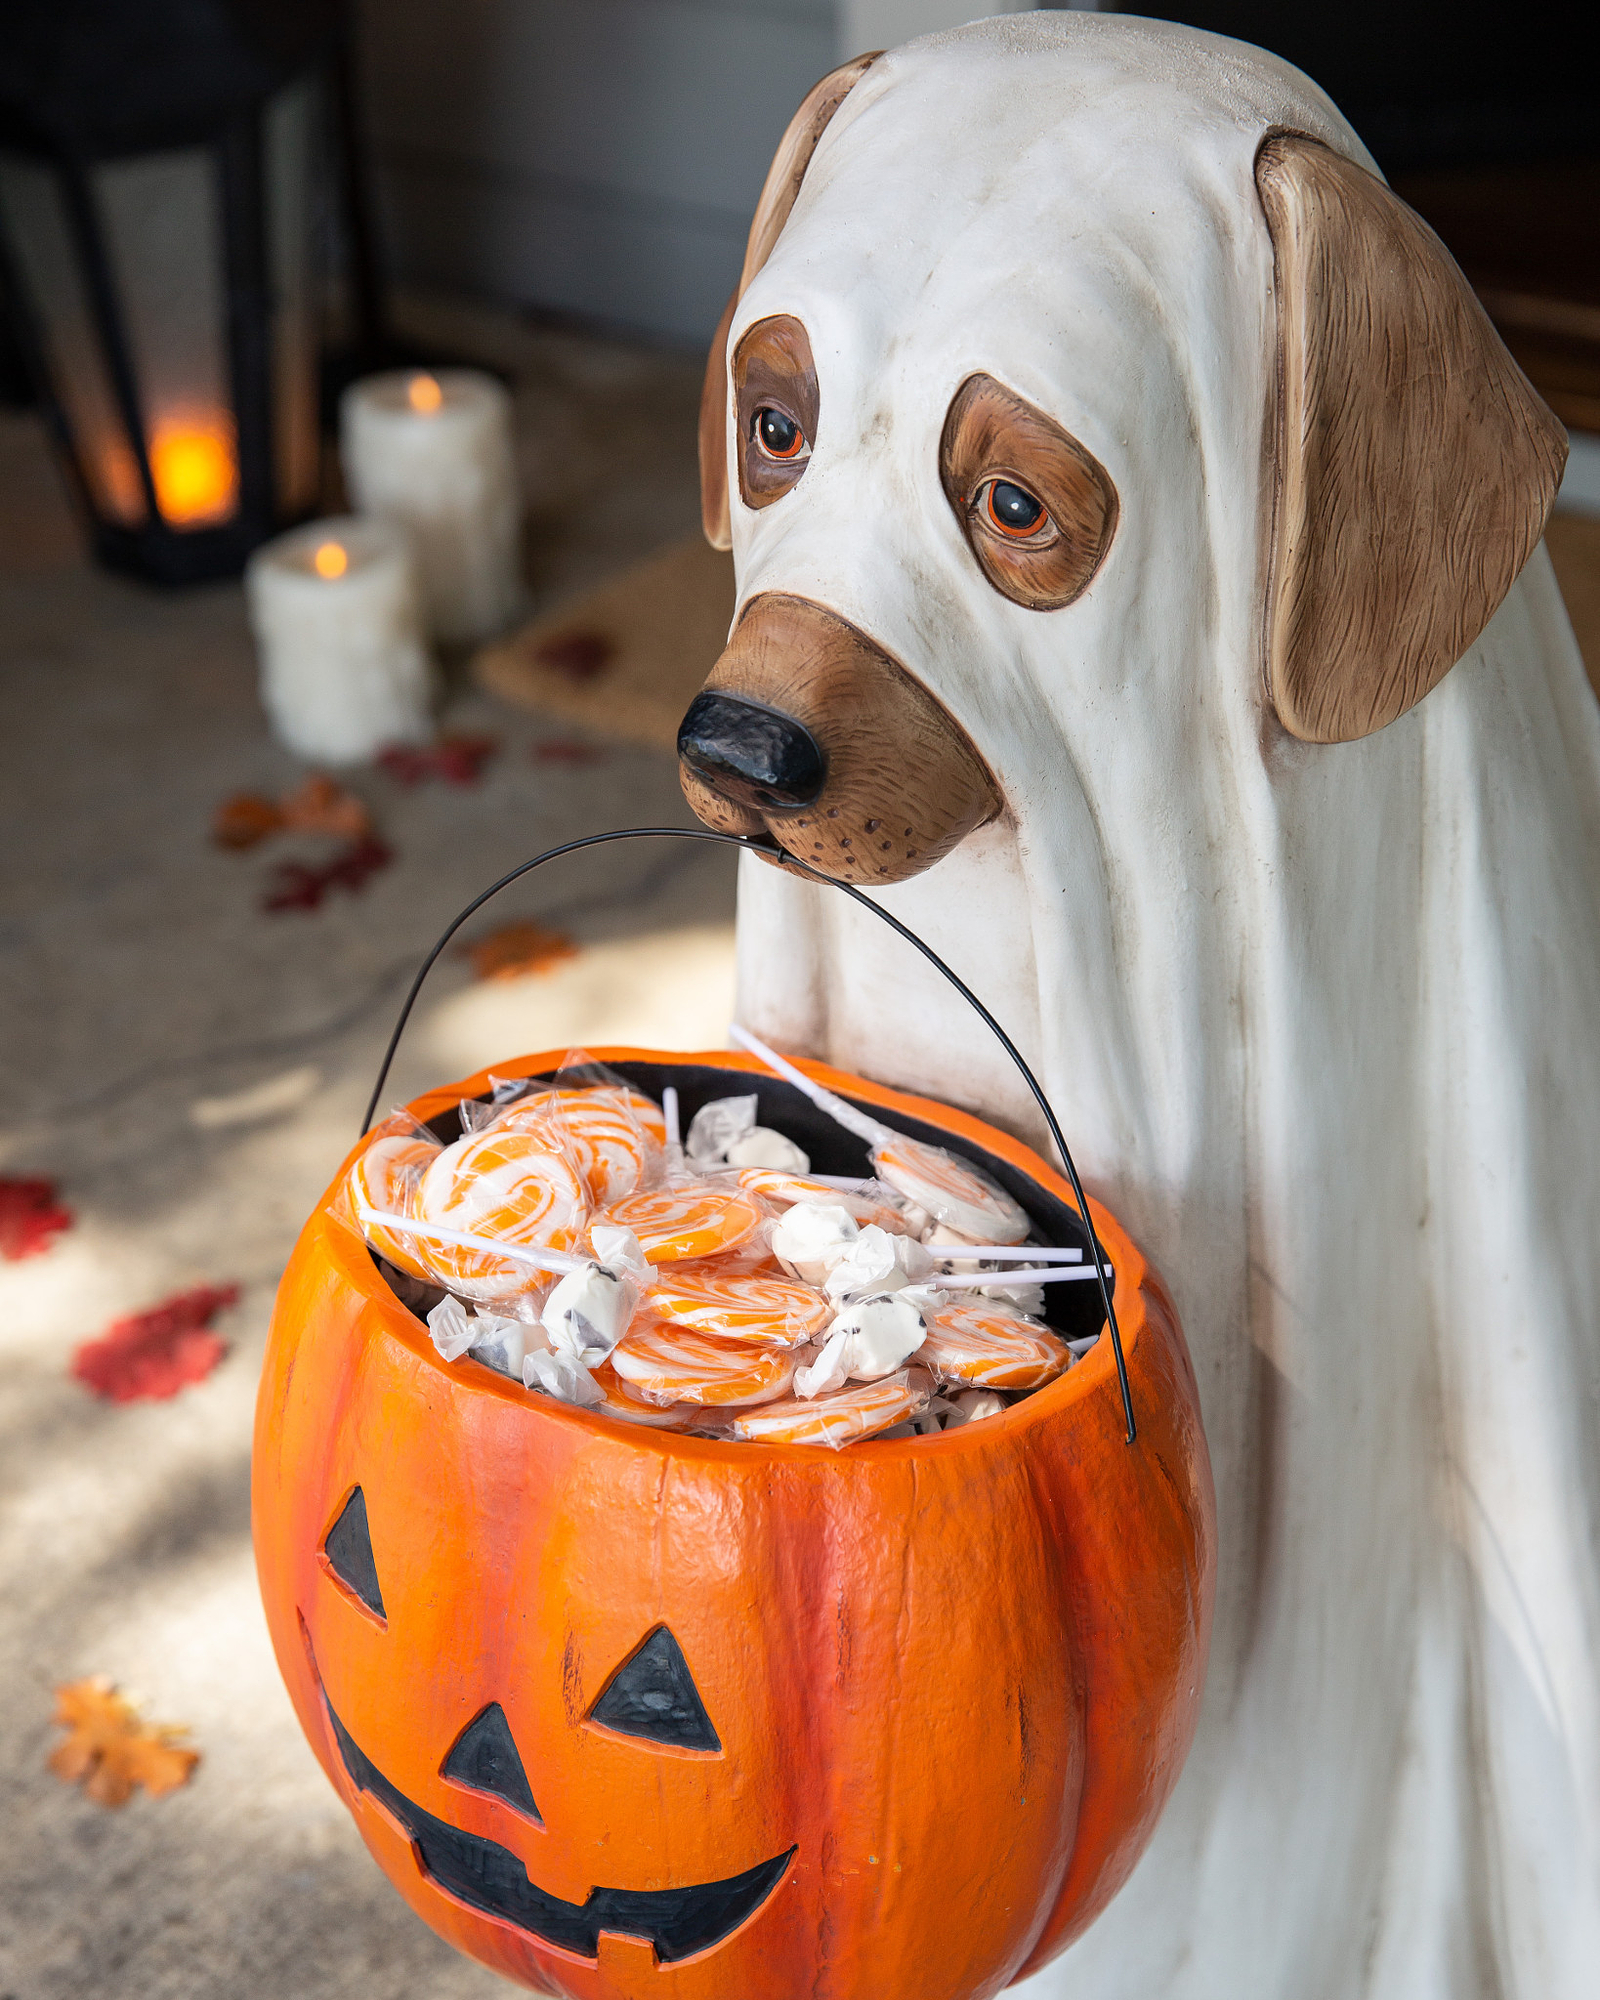 https://source.widen.net/content/xr3mbmerqc/jpeg/4002354_Outdoor-Life-Size-Ghost-Dog-Candy-Bowl_Closeup-10.jpeg?w=1600&h=2000&keep=c&crop=yes&color=cccccc&quality=100&u=7mzq6p